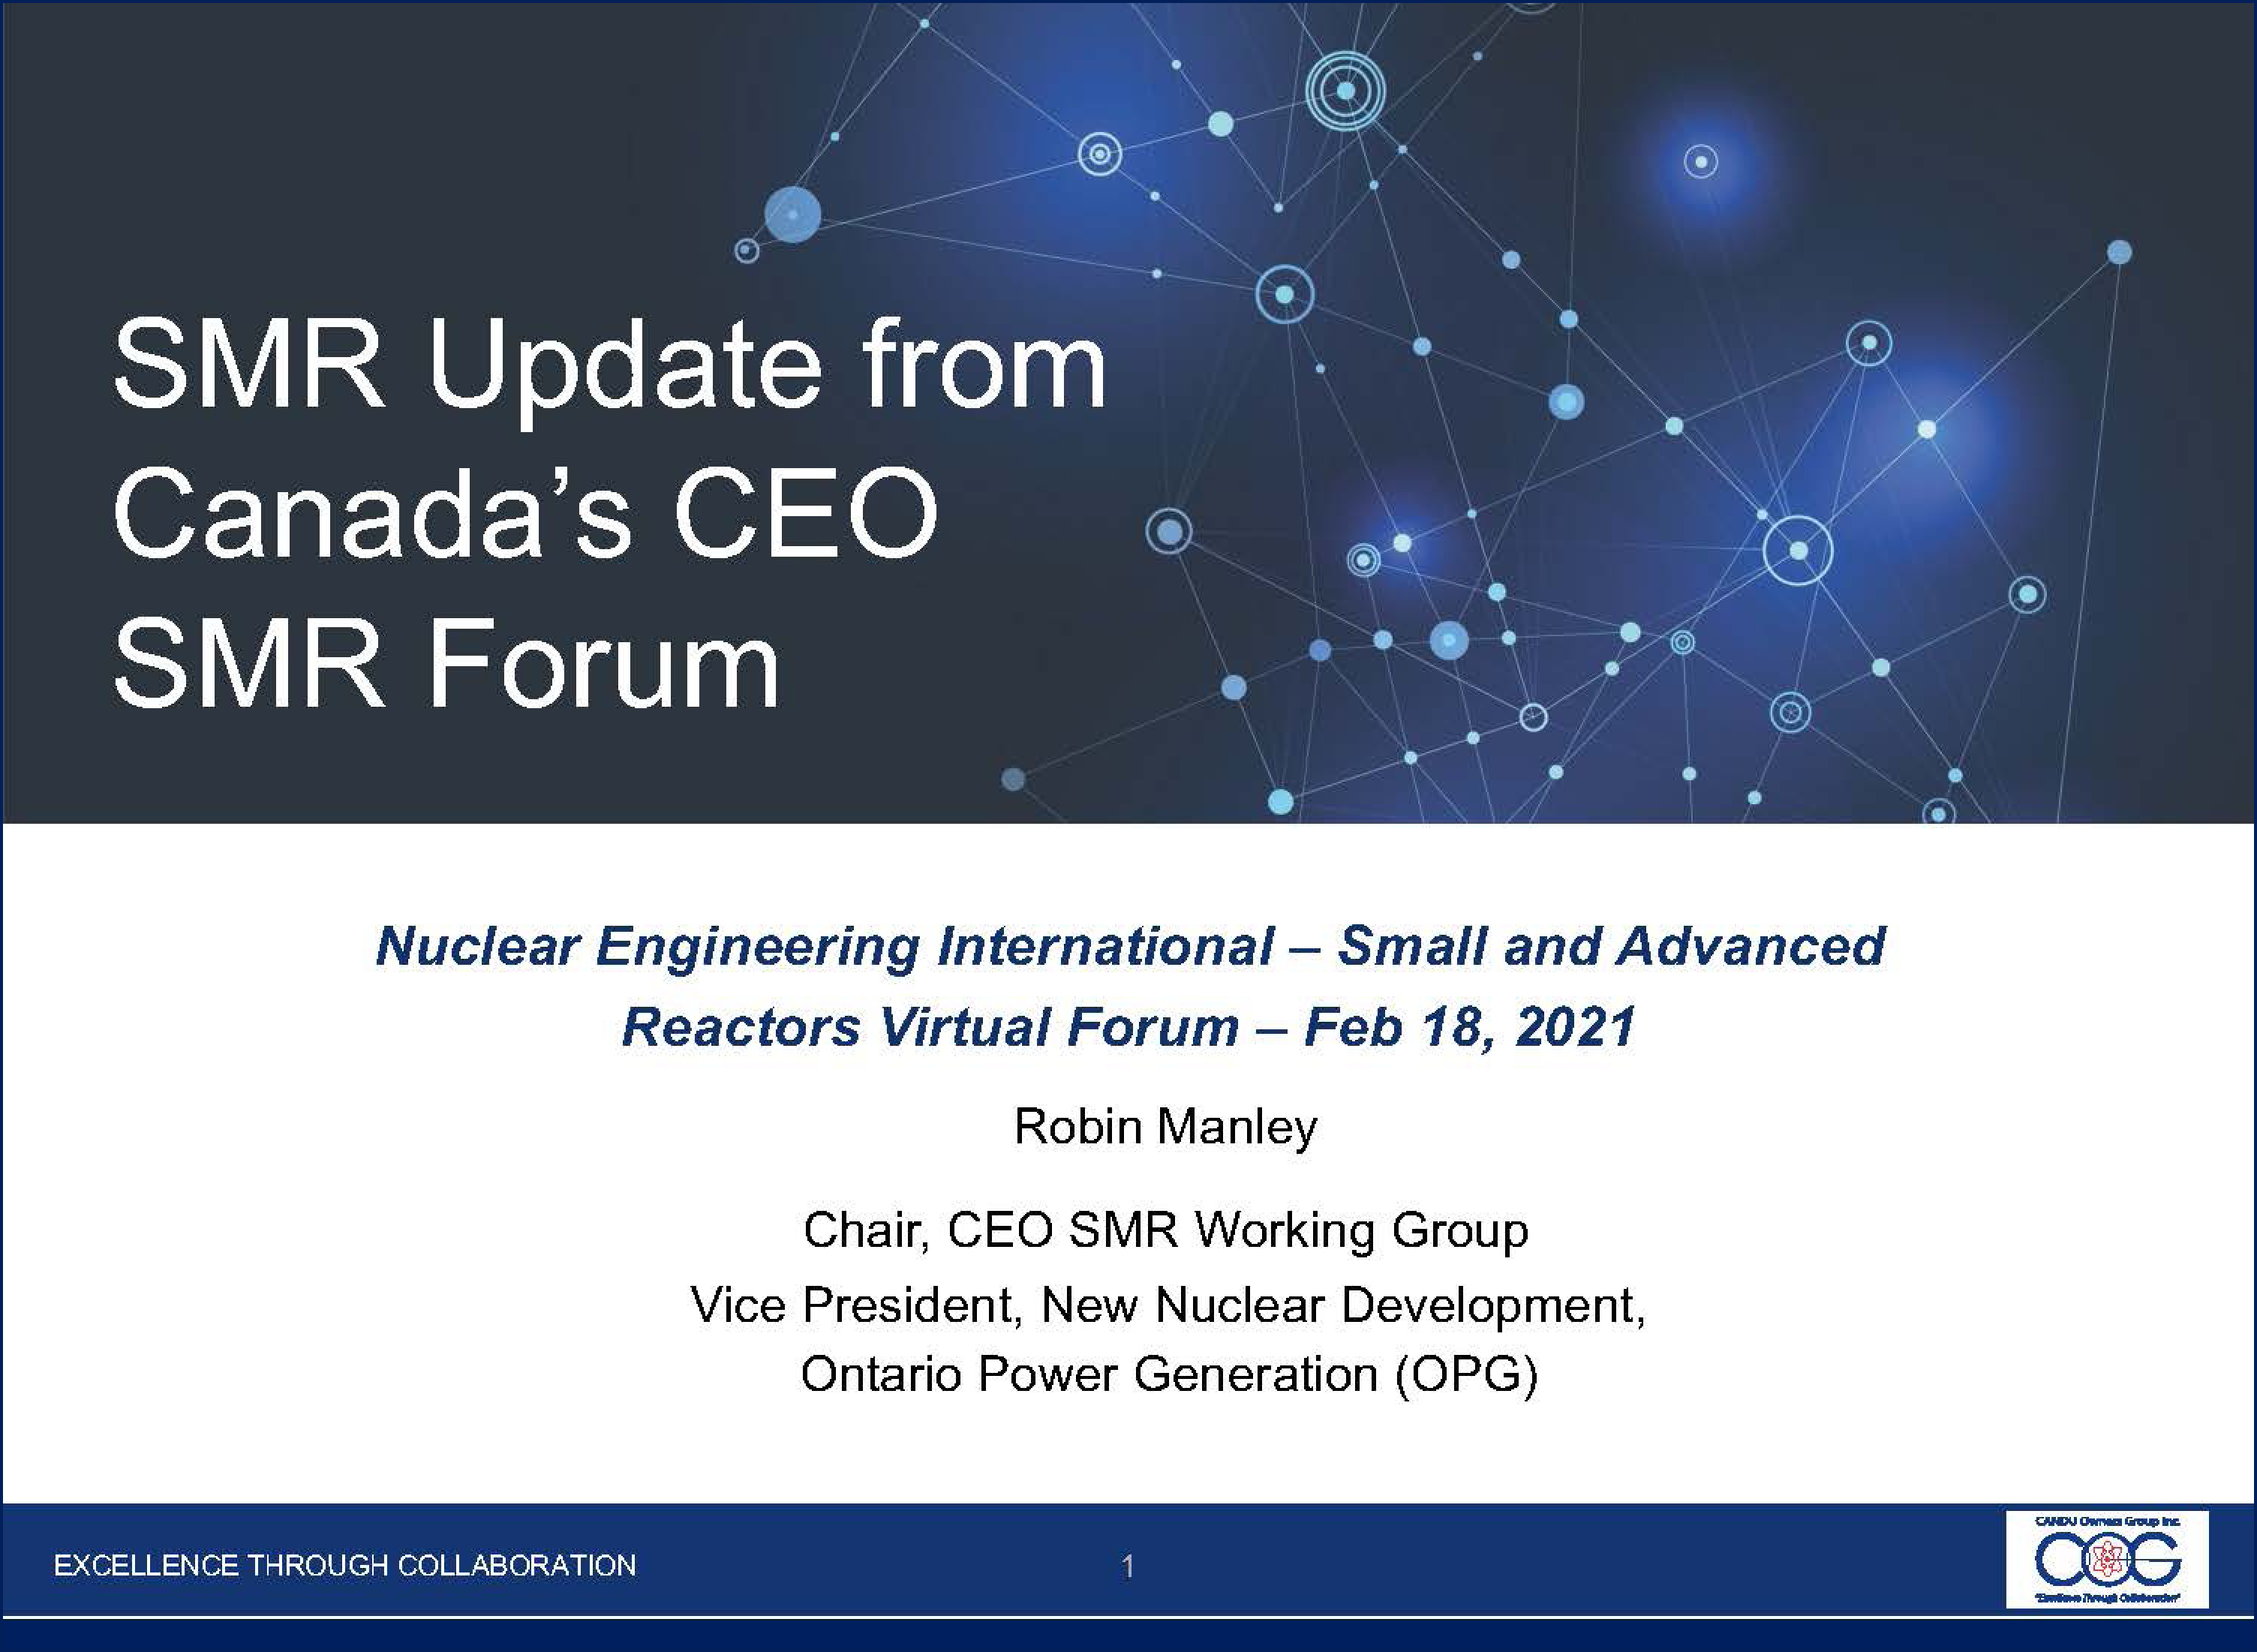 SMR Update from Canada's CEO Forum (NEI SMR Conference).jpg